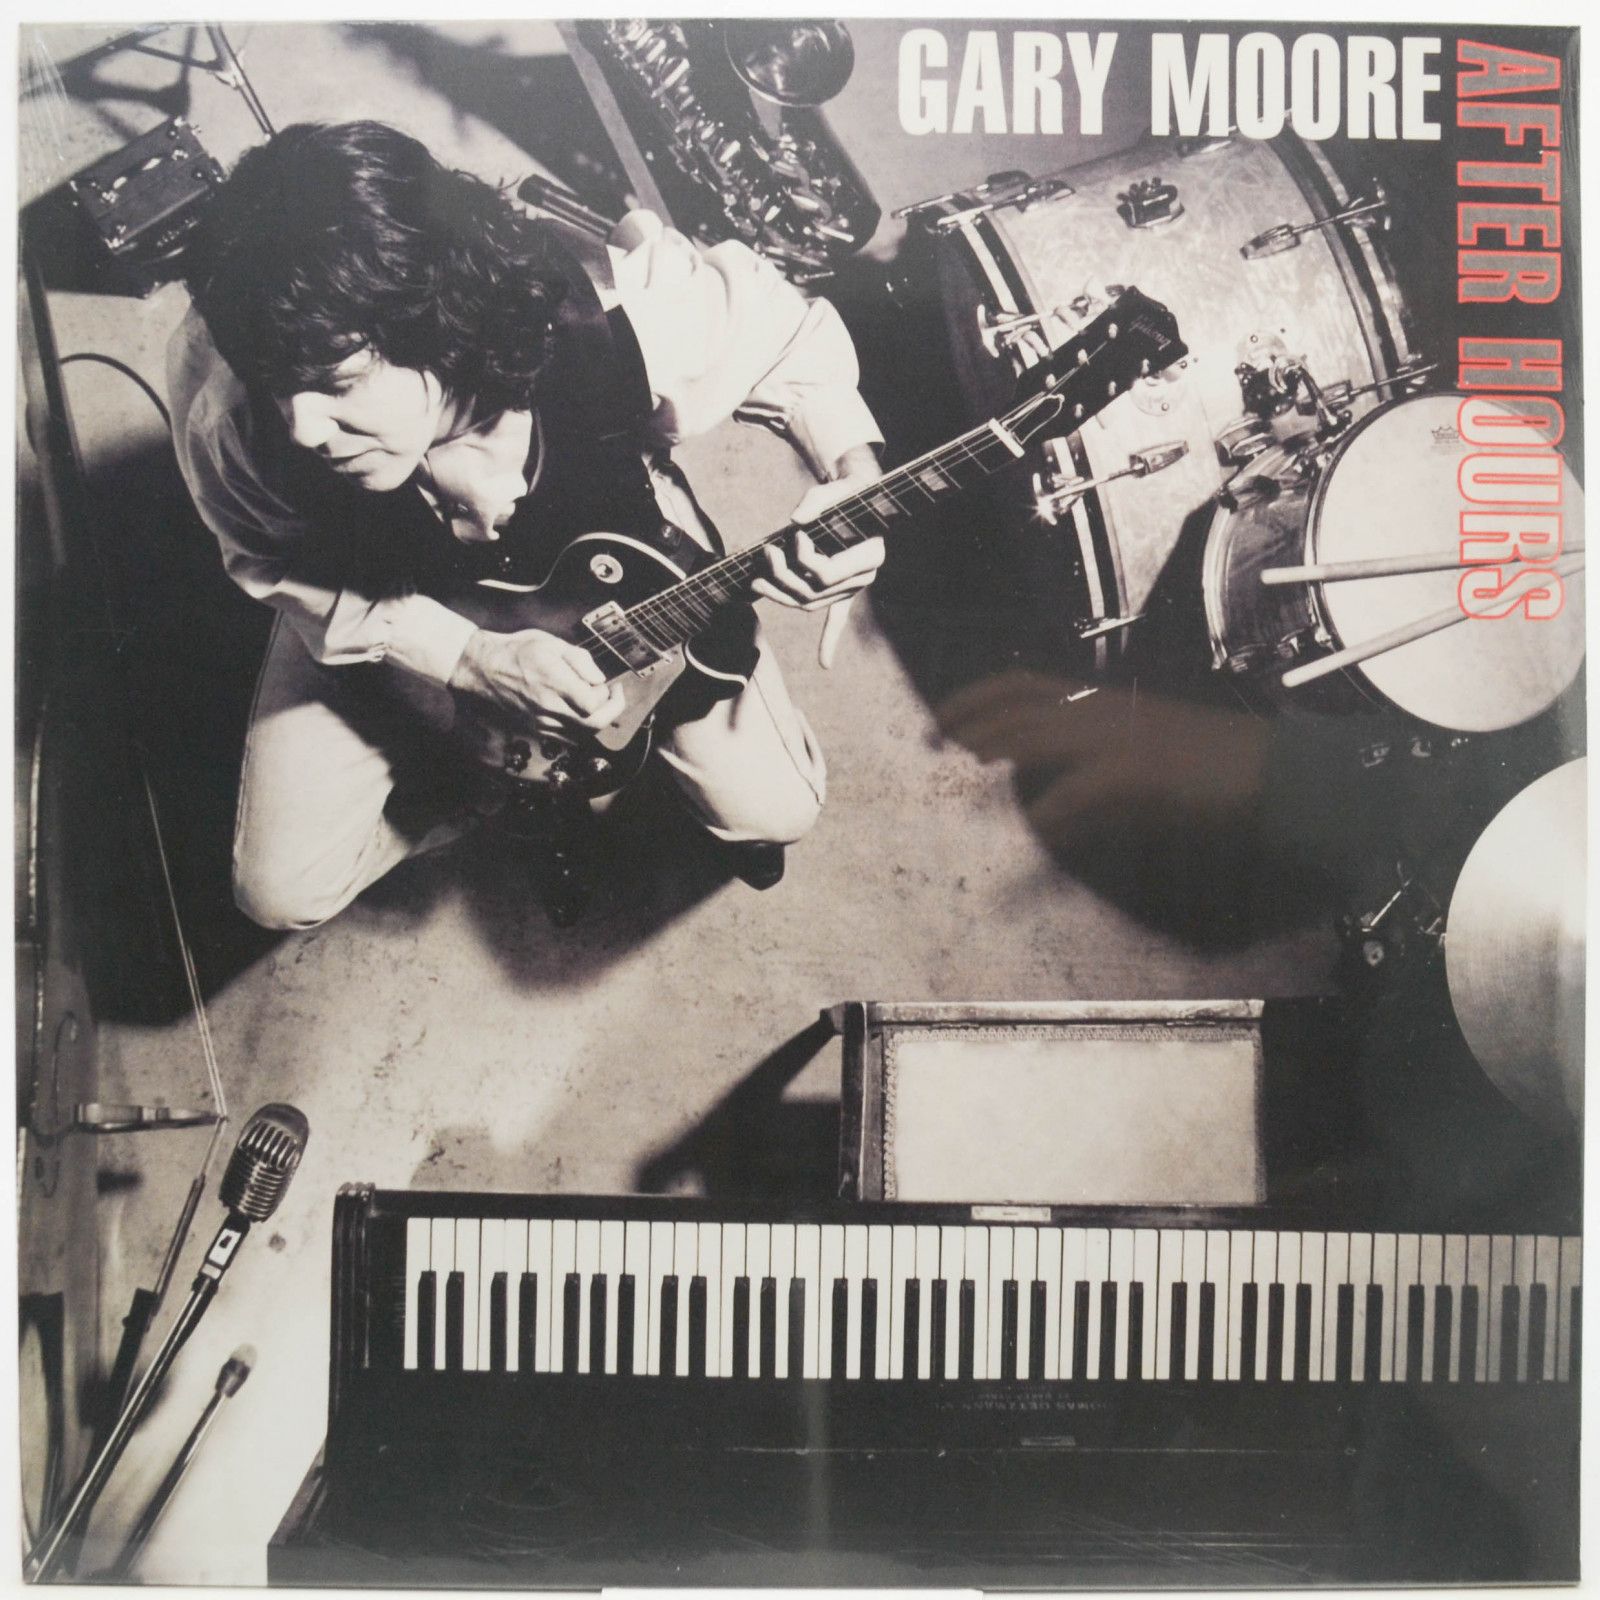 Gary Moore — After Hours, 1992